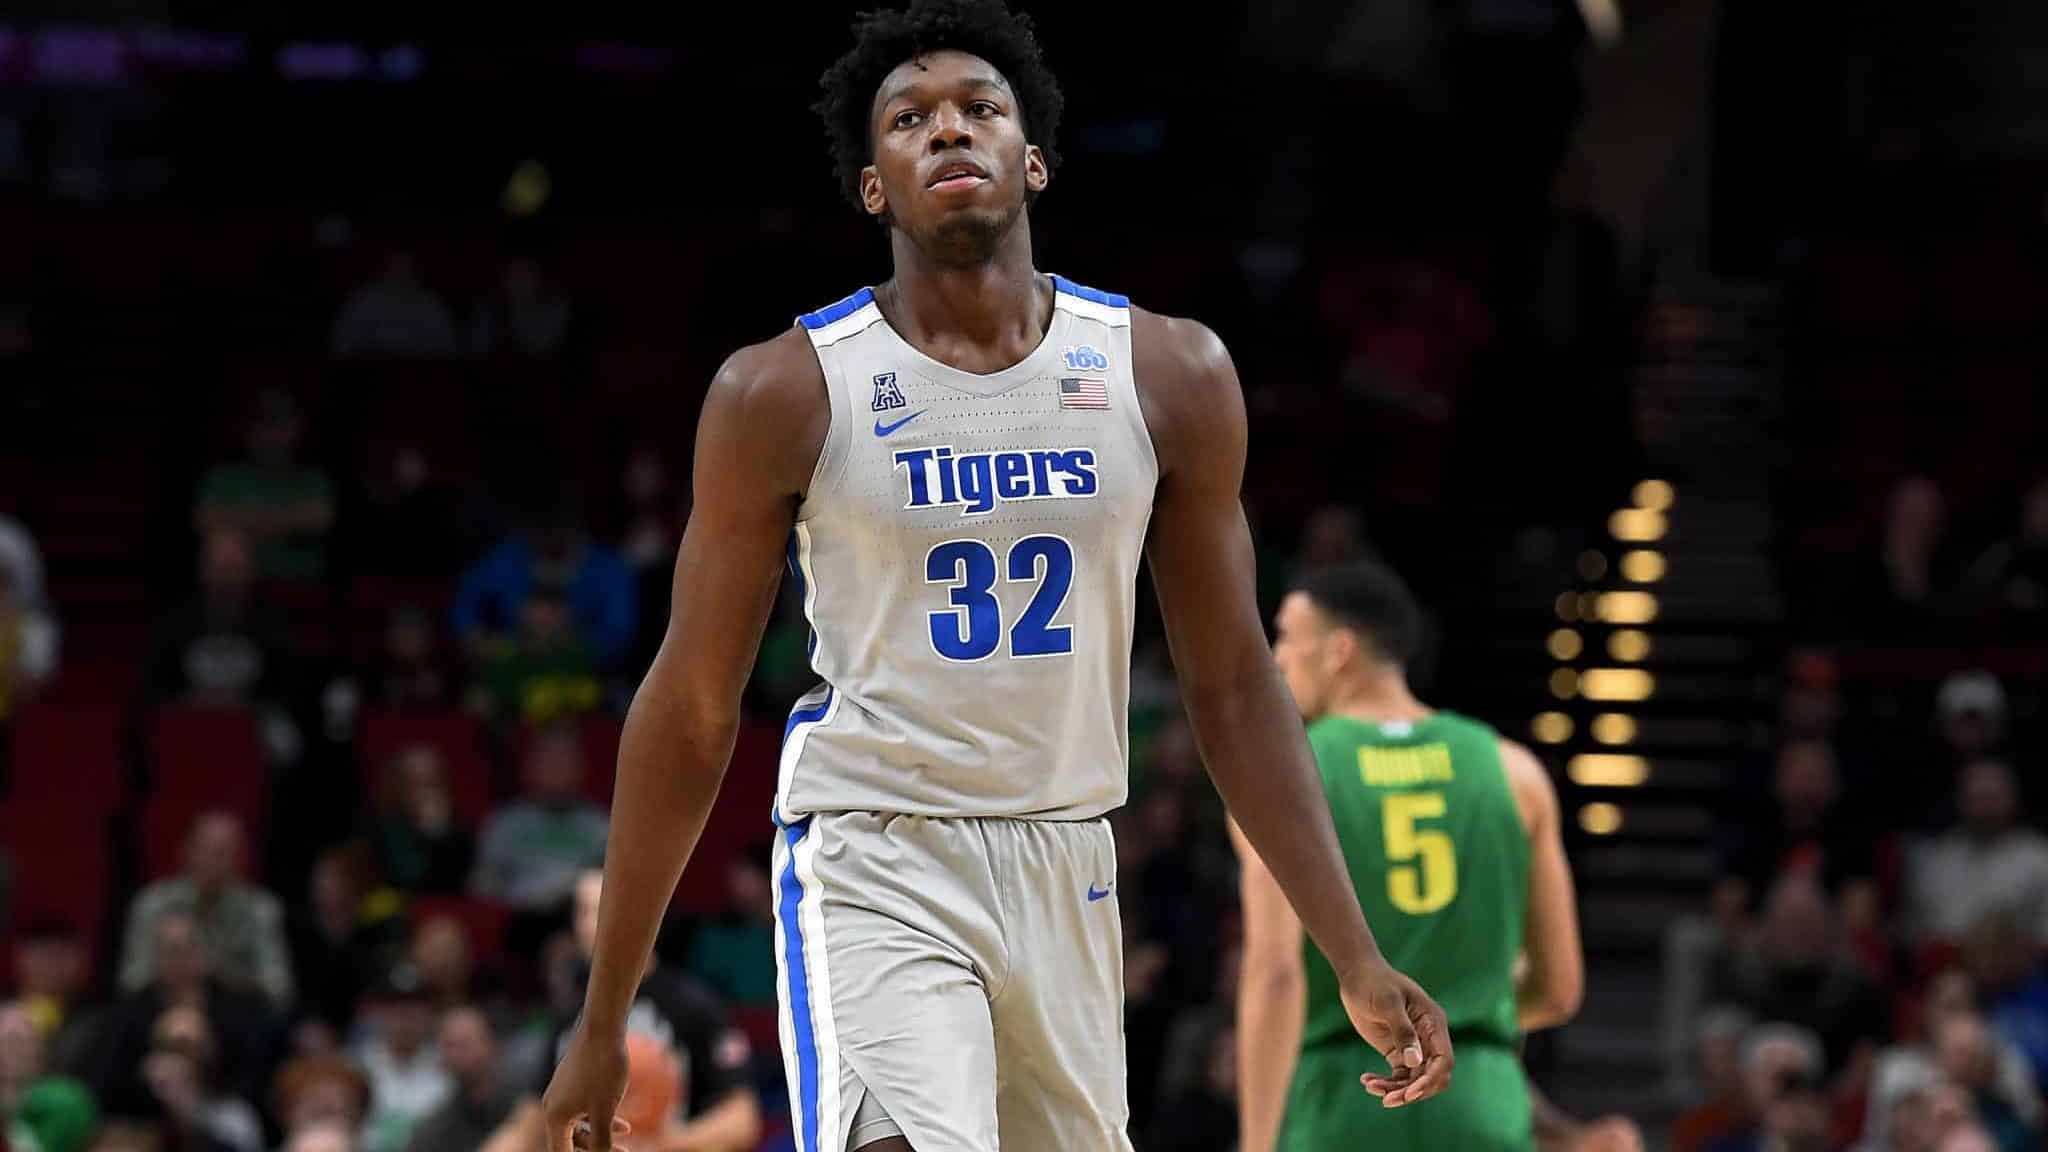 PORTLAND, OREGON - NOVEMBER 12: James Wiseman #32 of the Memphis Tigers walks up court during the first half of the game against the Oregon Ducks between the Oregon Ducks and Memphis Grizzlies at Moda Center on November 12, 2019 in Portland, Oregon.